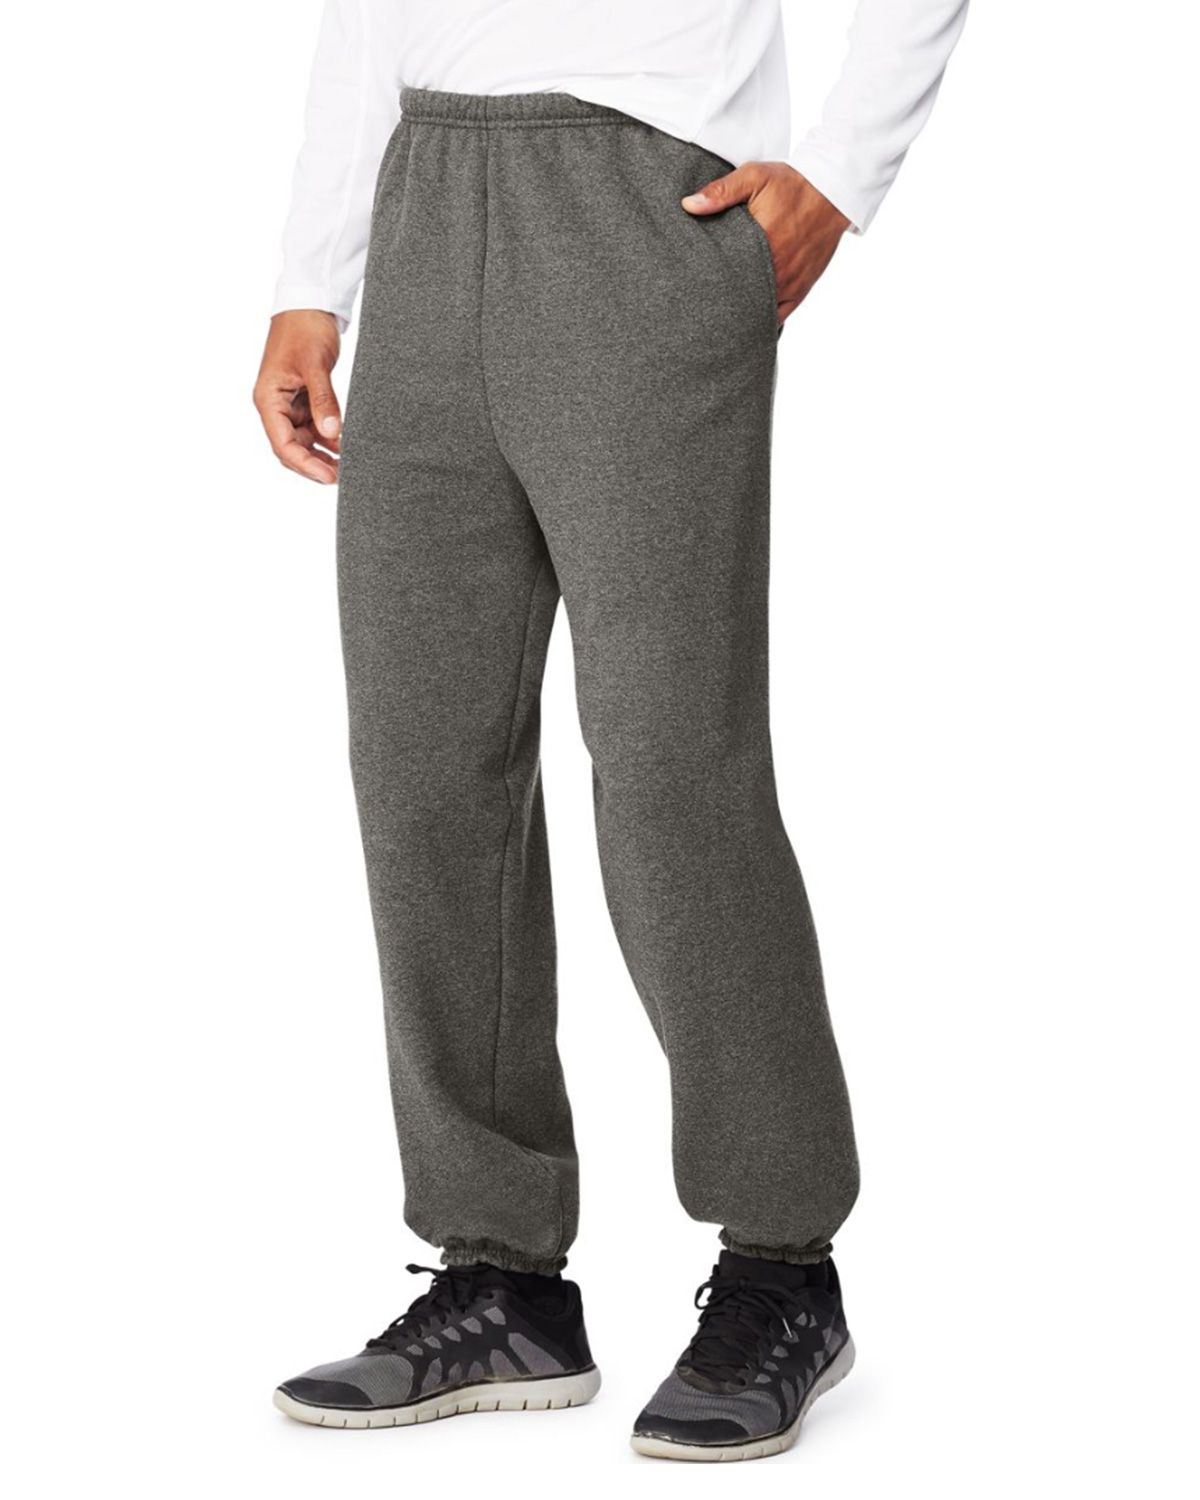 Hanes OF360 Sport Ultimate Cotton Mens Fleece Sweatpants With Pockets